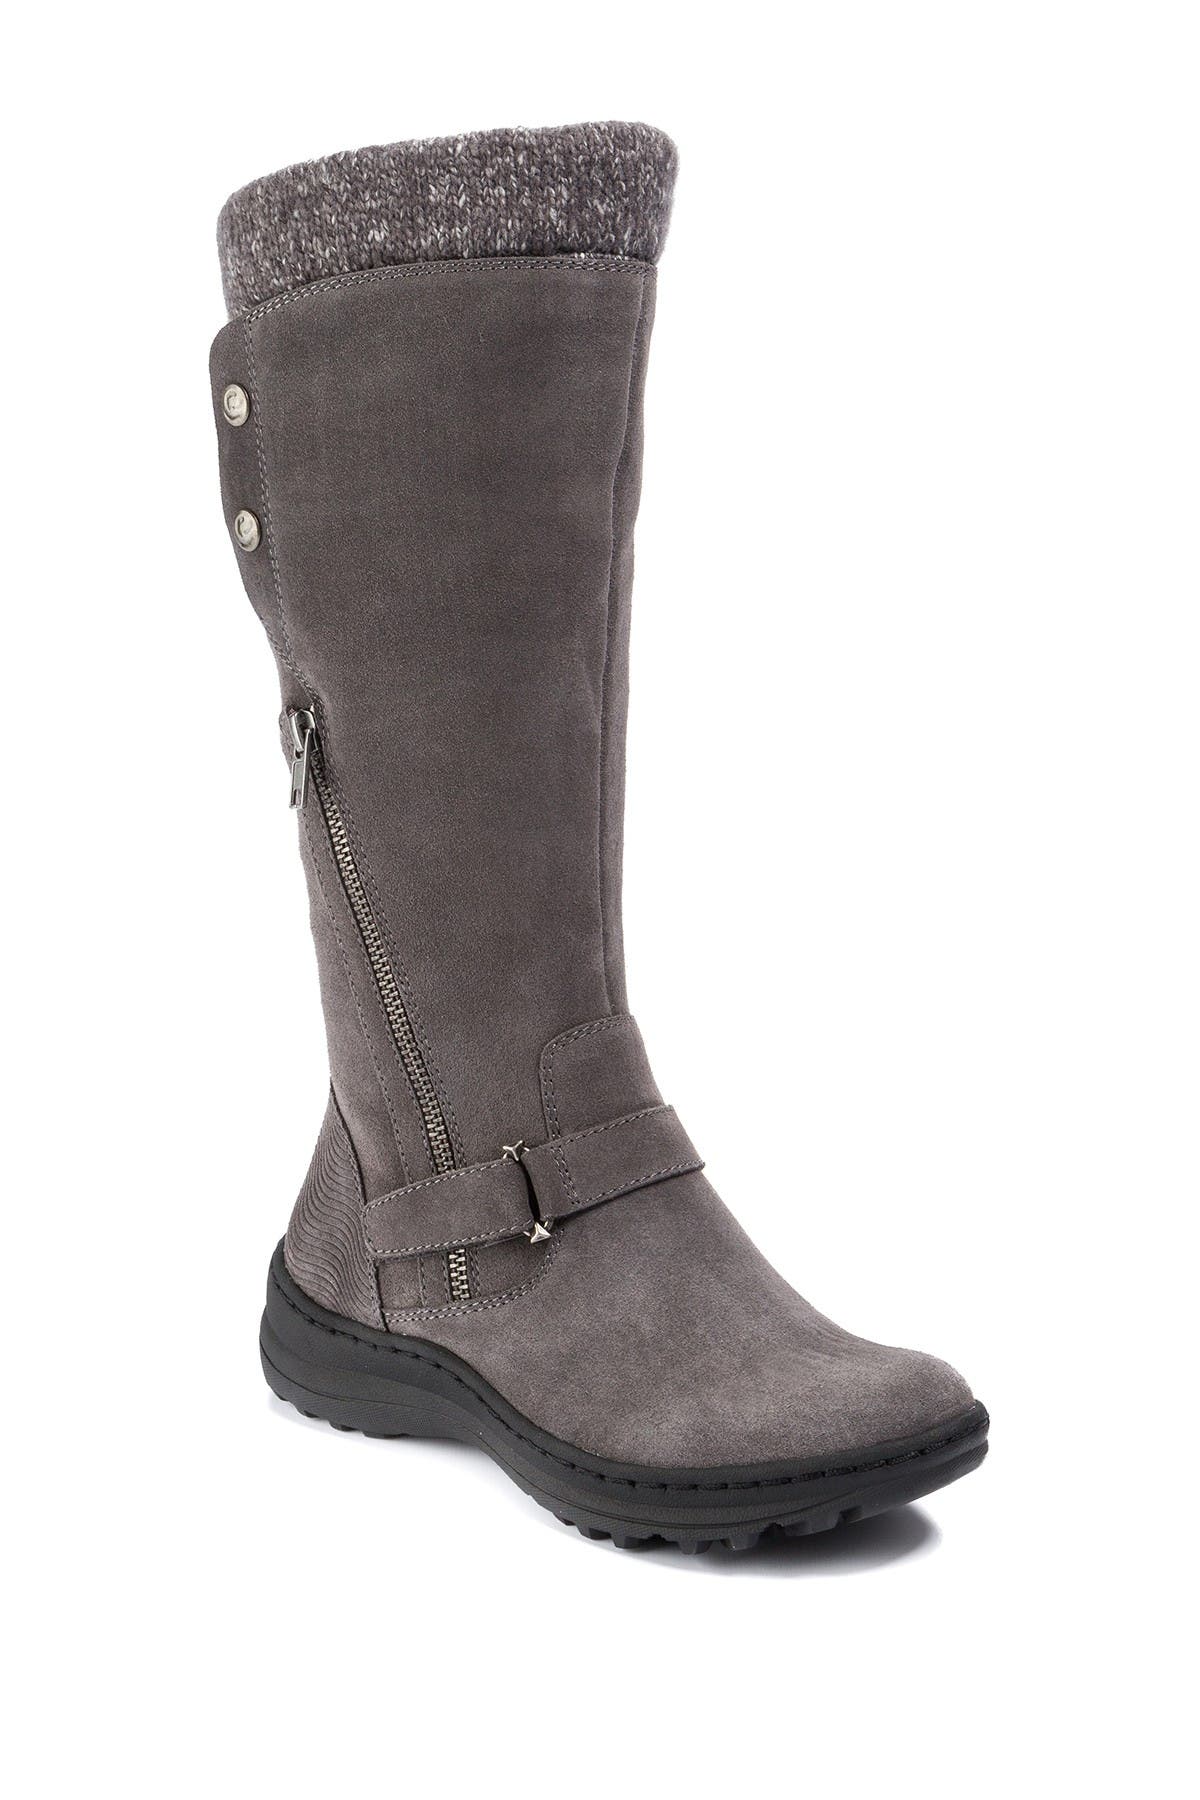 Baretraps Adele Tall Water Resistant Faux Shearling Boot In Gunmetal ...